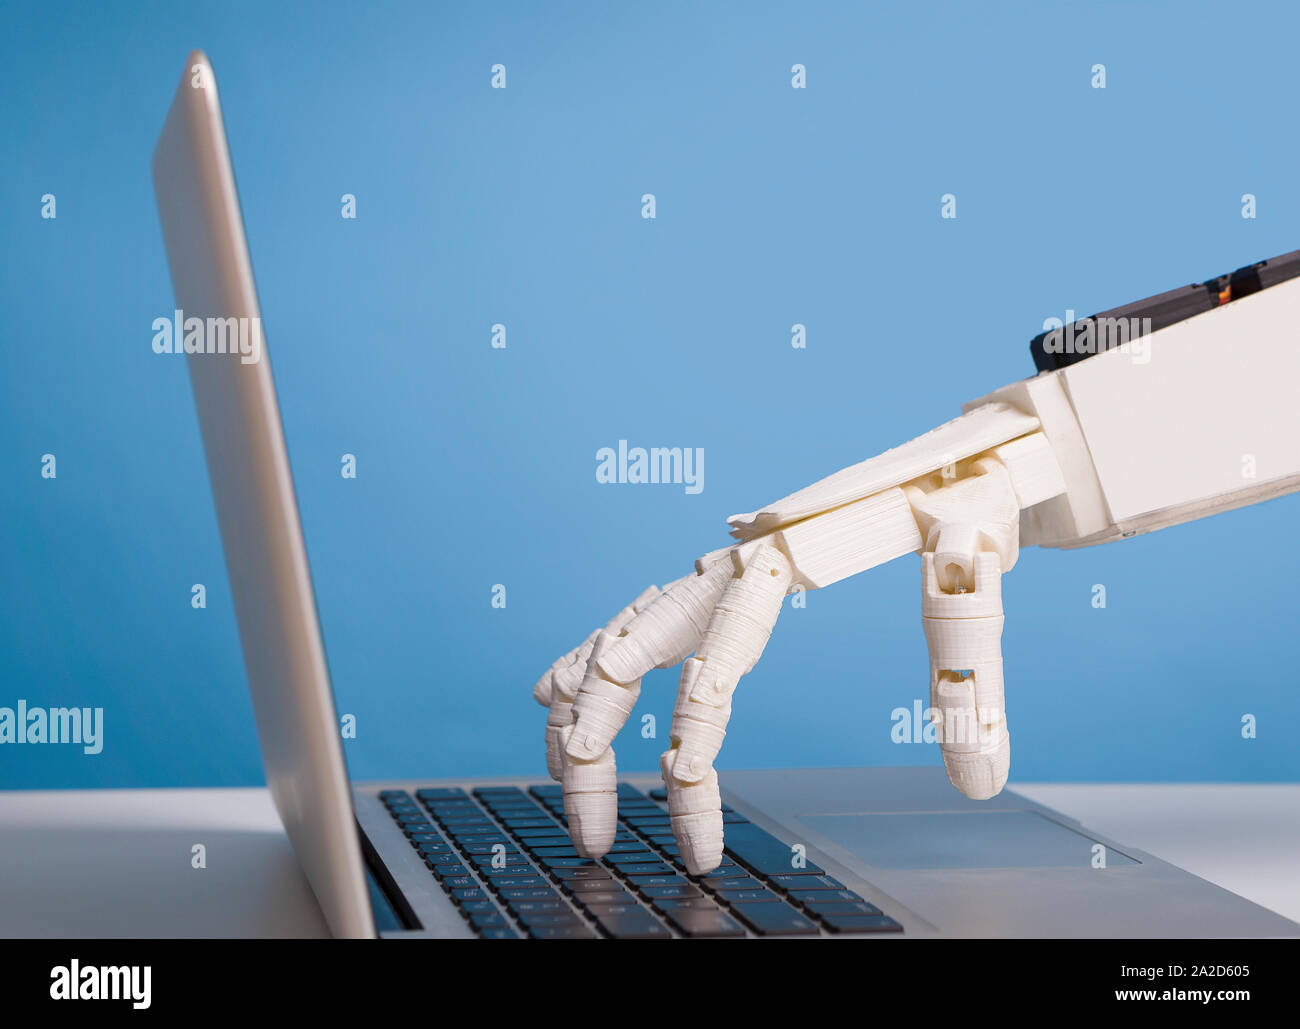 Robotic hand typing on laptop keyboard, free space Stock Photo